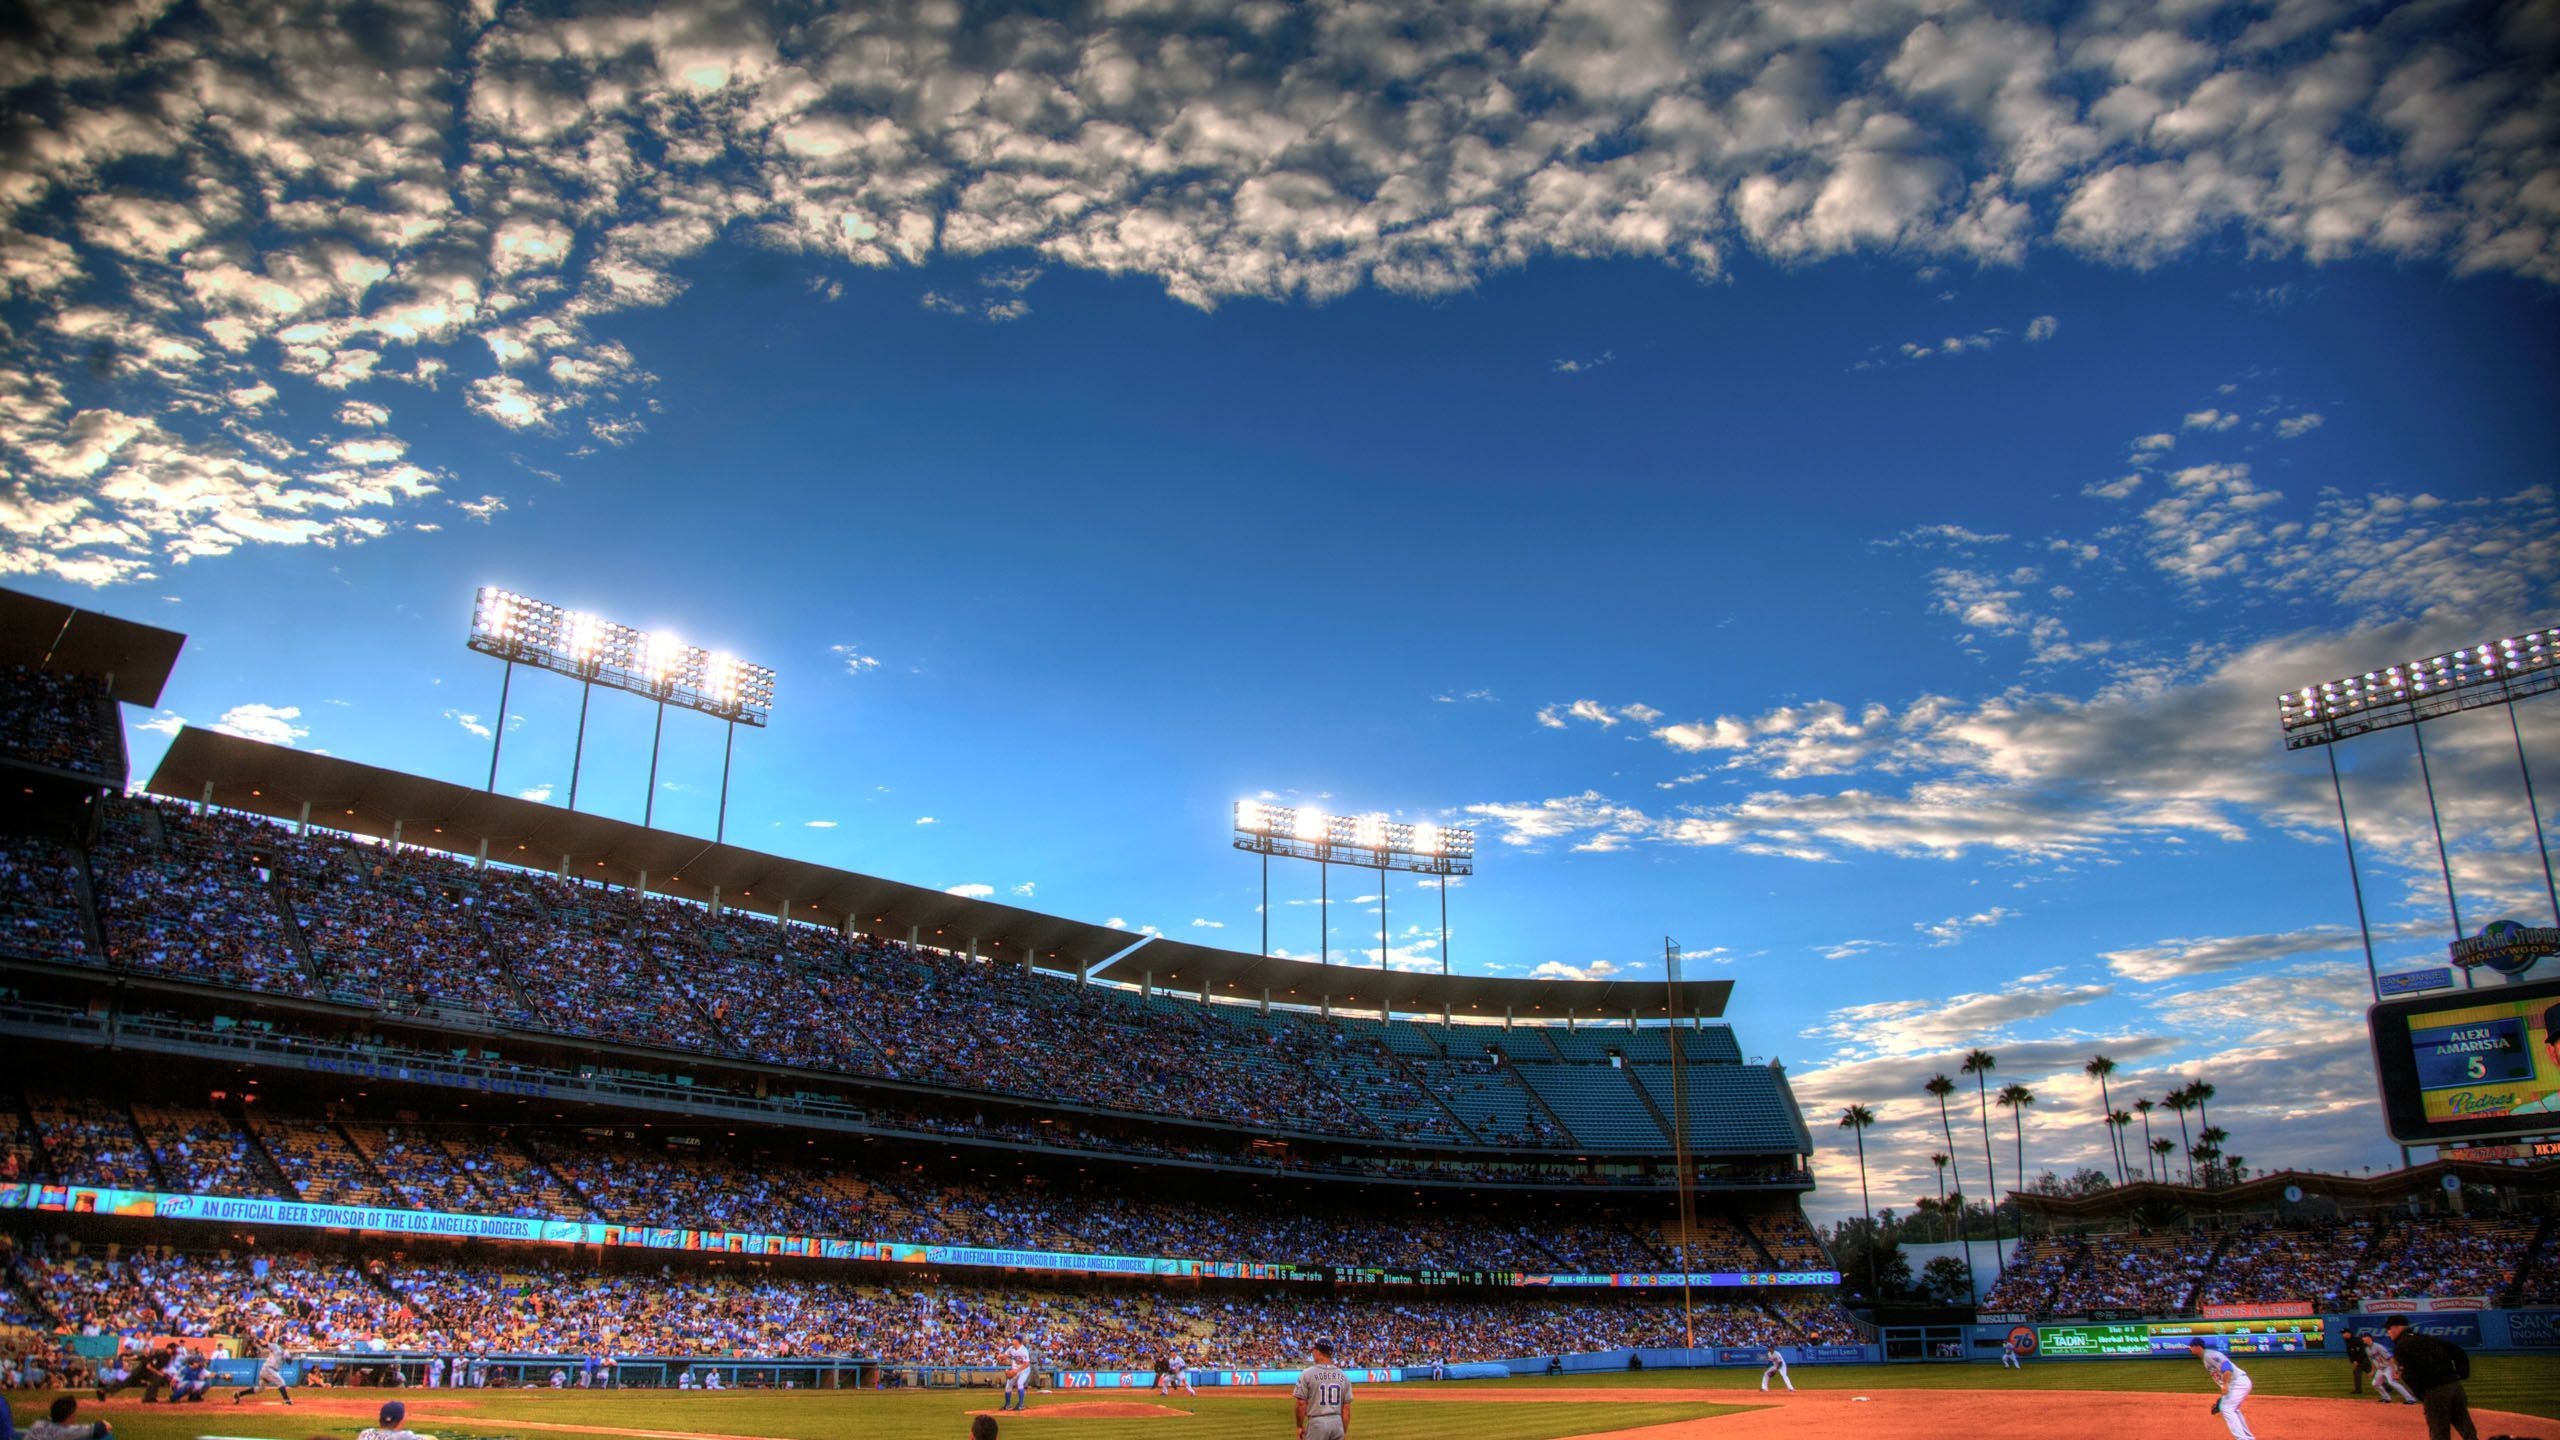 2560x1440 Los Angeles Dodgers images Dodger Stadium wallpaper and background | HD  Wallpapers | Pinterest | Dodger stadium, Los angeles dodgers and Dodgers